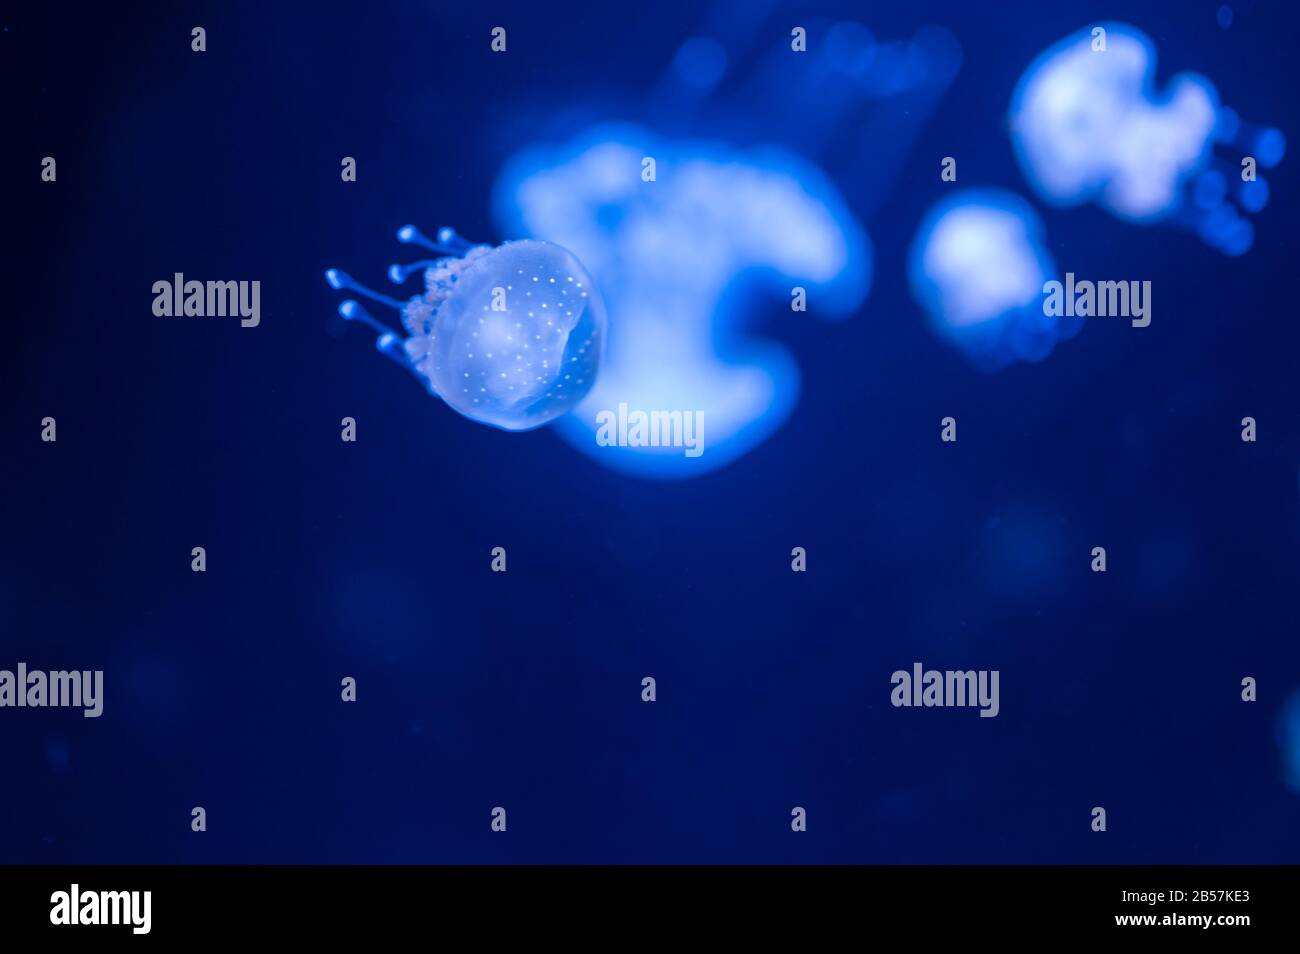 Small jellyfish floating in the water. Dark blue light is on background. Stock Photo